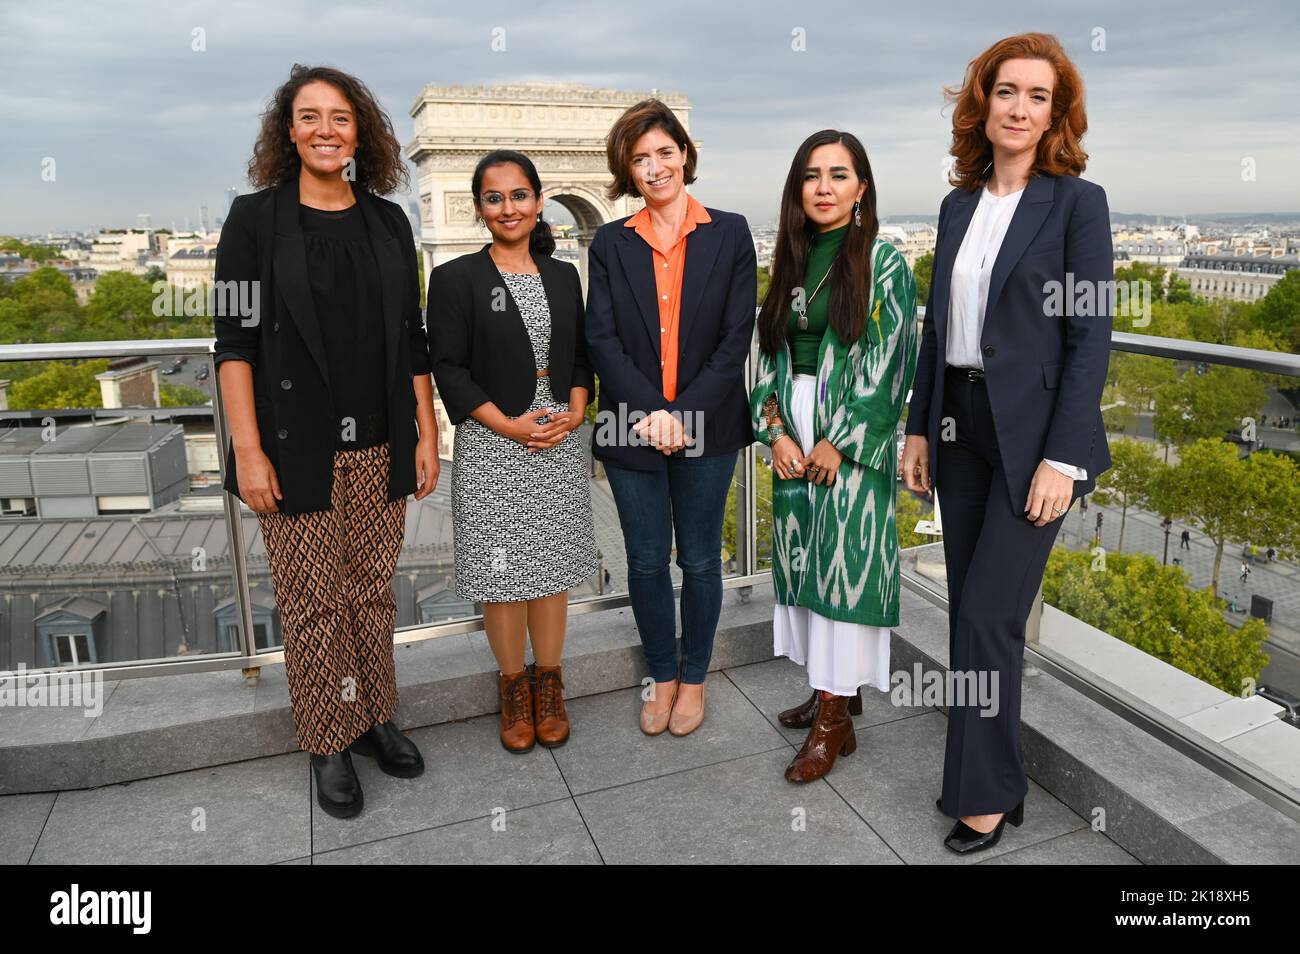 Souad Boutegrabet, CEO of Des Codeuses, Nupur Kohli, Dutch Founder and Director of NIIS Healthcare, Christel Heydemann, CEO of Orange, Nupur Kohli, Dutch Founder and Director of NIIS Healthcare and Anne-Laure de Chammard, CEO of Energy Solutions International, ENGIE, at the Women's Forum Rising Talents event in Paris, France on September 16, 2022. Photo by Laurent Zabulon/ABACAPRESS.COM Stock Photo